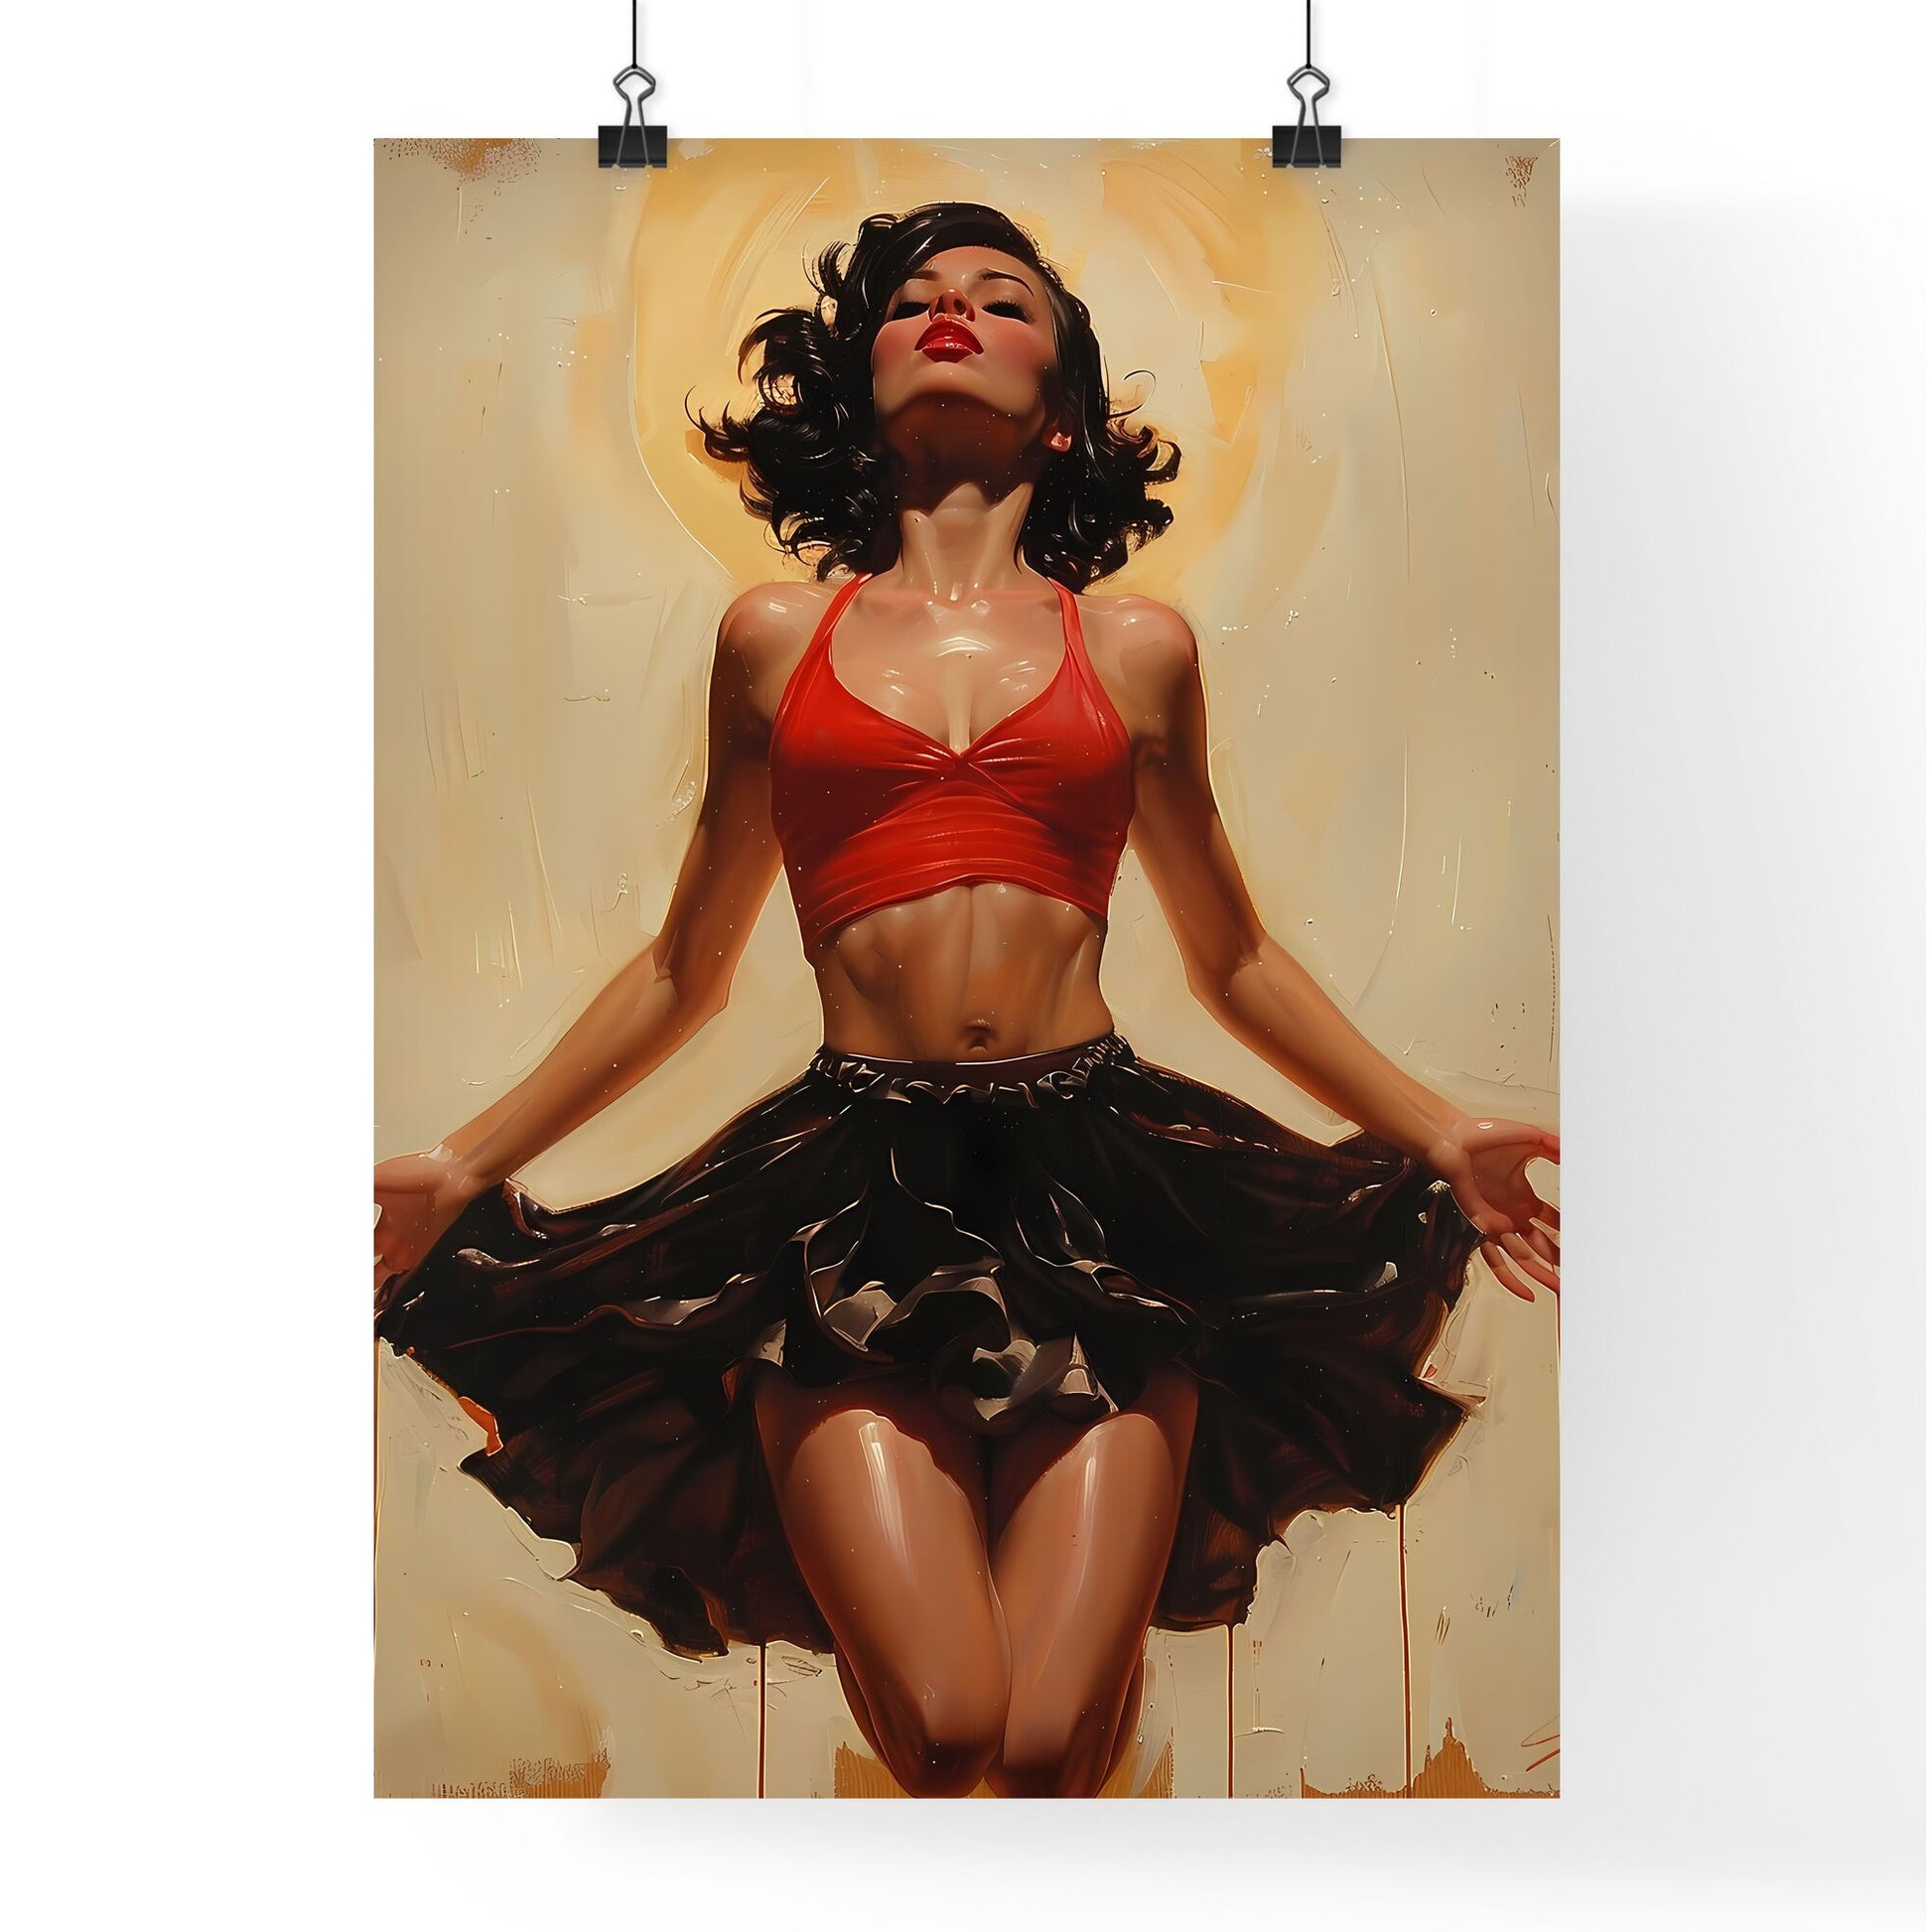 Vibrant Painting of a Woman in a Red Top and Black Skirt Default Title